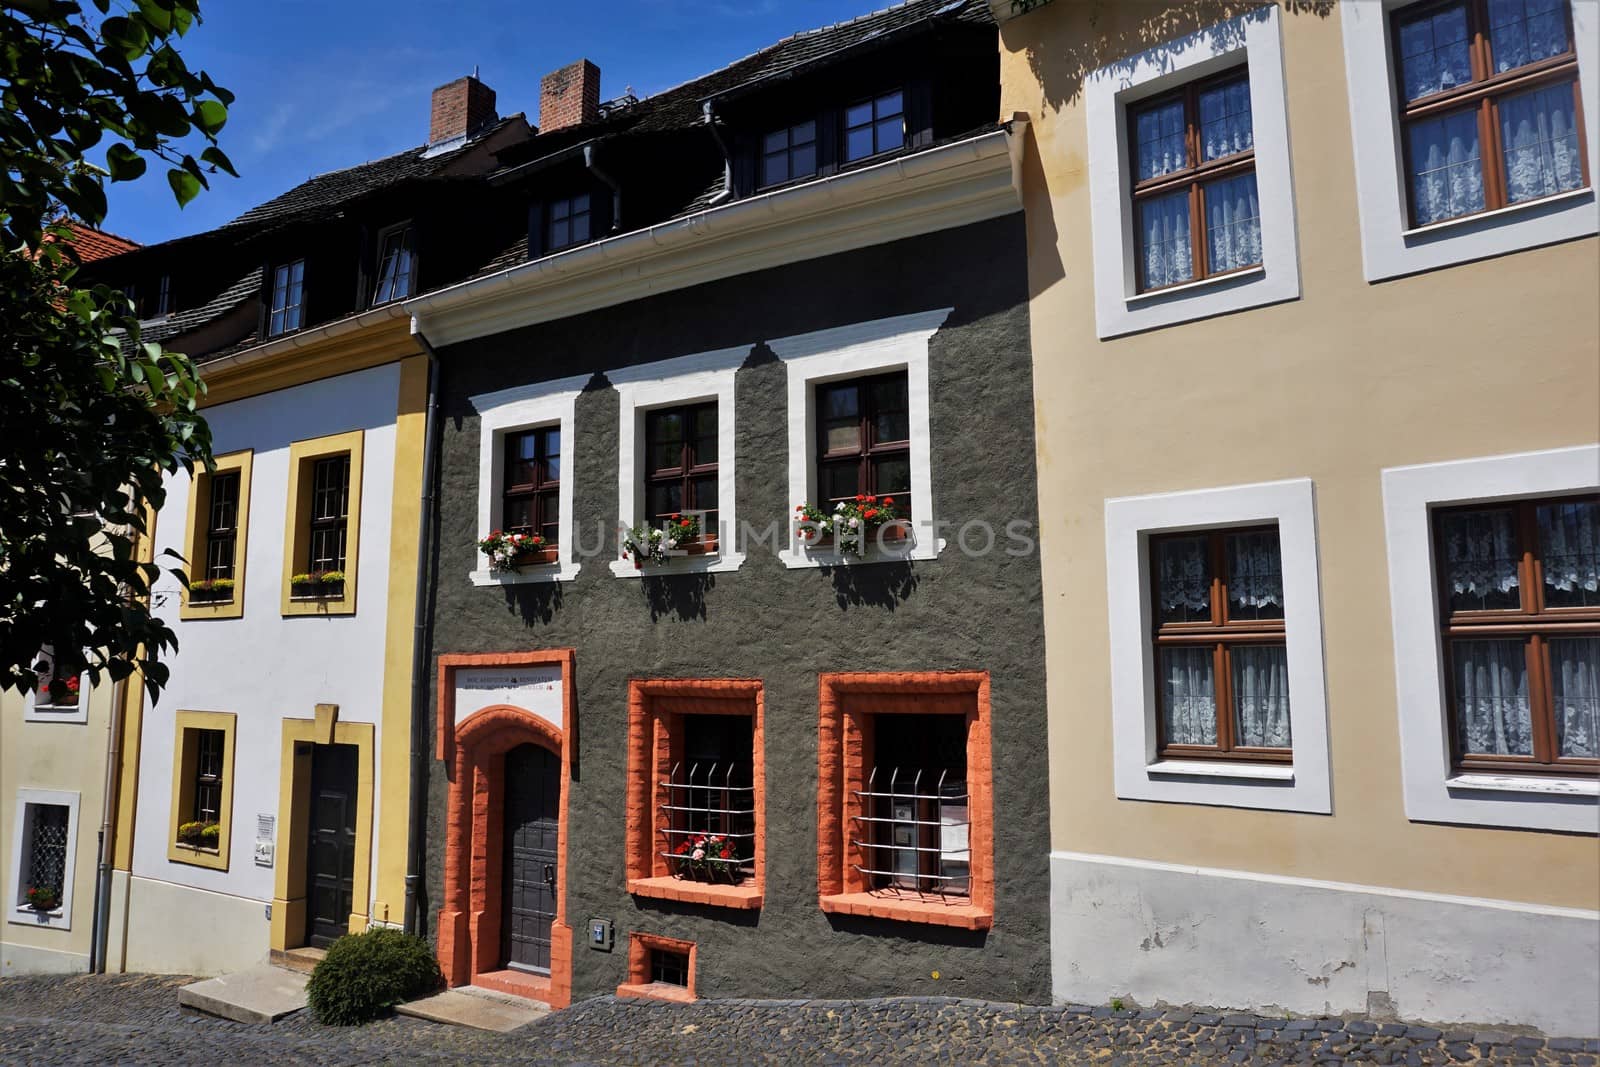 Picturesque row of houses spotted in the Karpfengrund street in Goerlitz by pisces2386